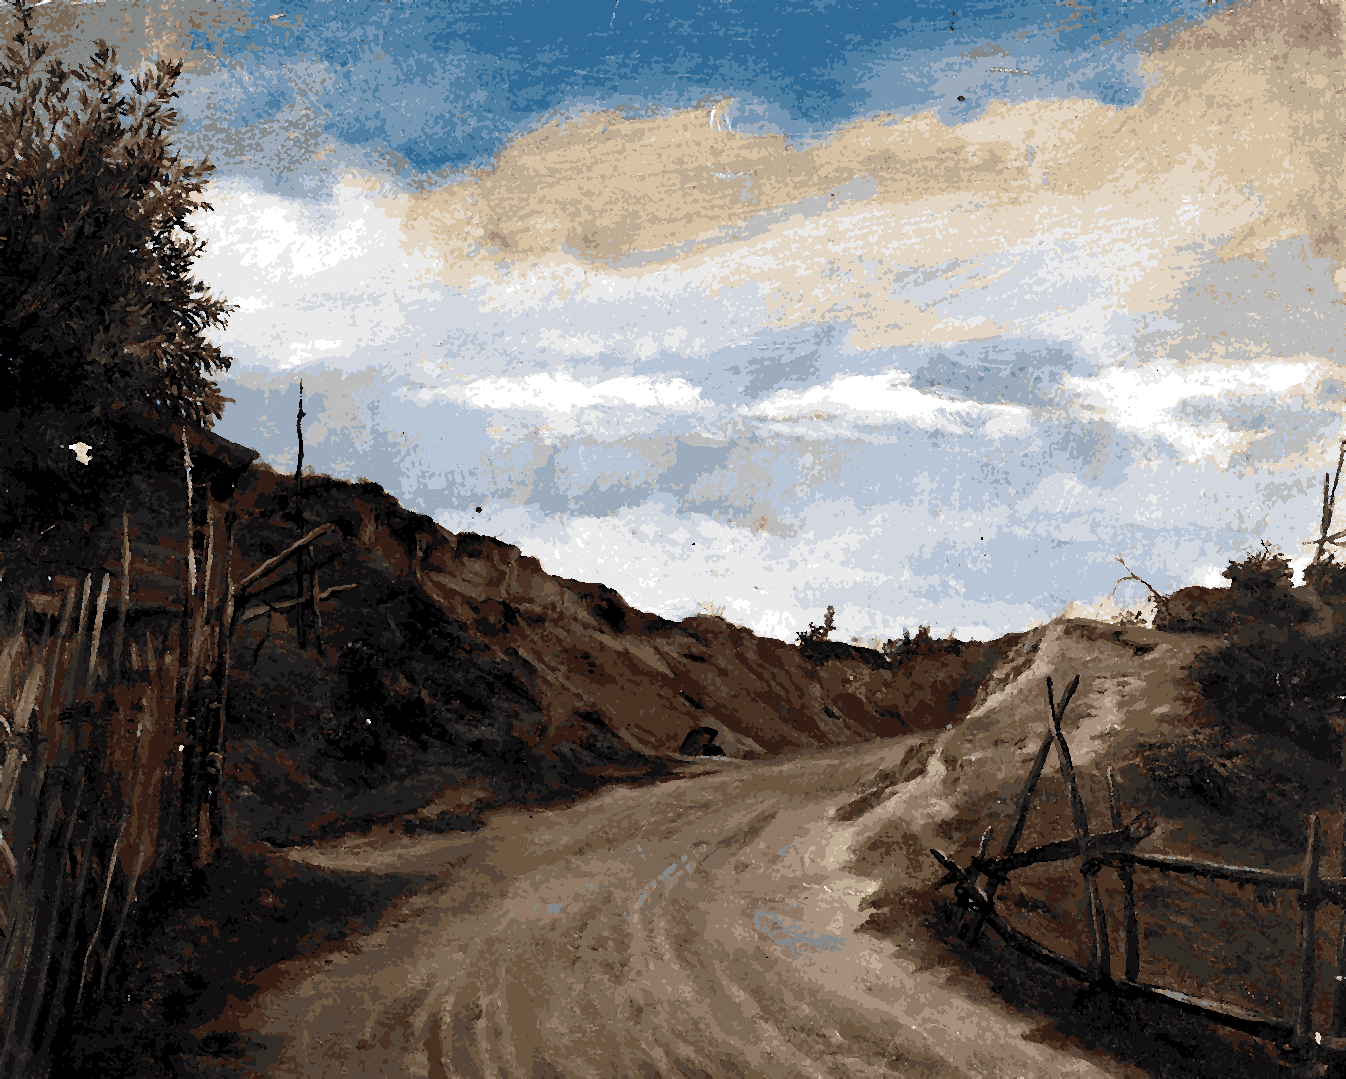 Country Road by Adolph Tidemand - Van-Go Paint-By-Number